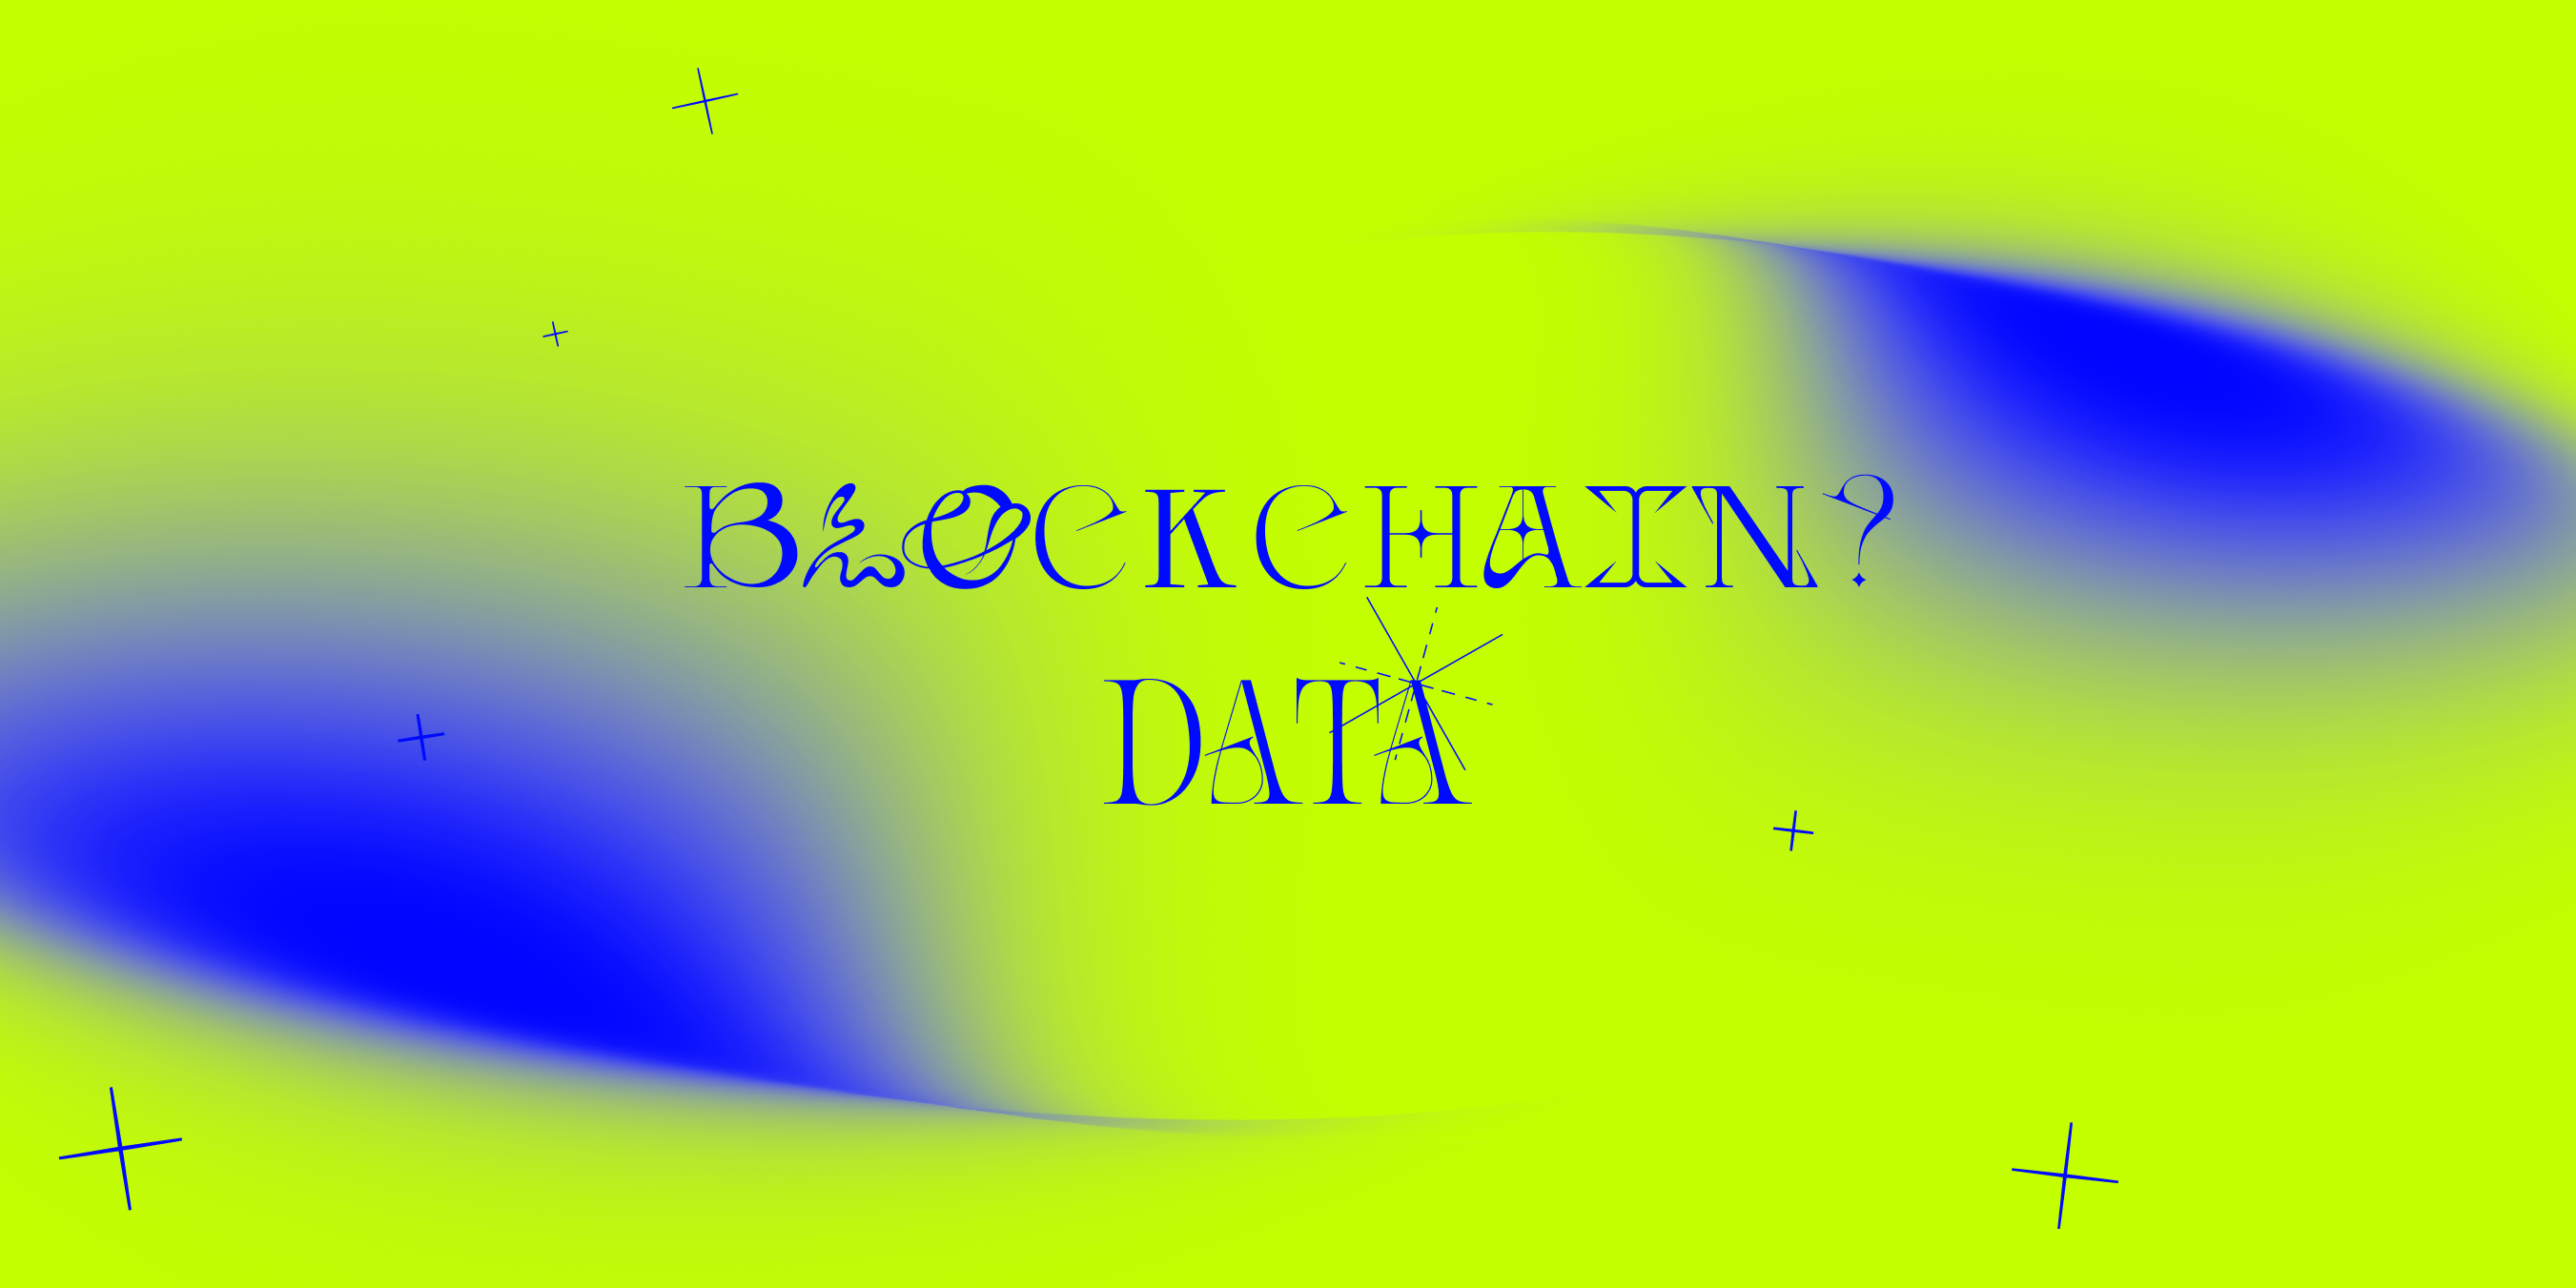 Graphic with the caption "Blockchain Data" in blue on a green background